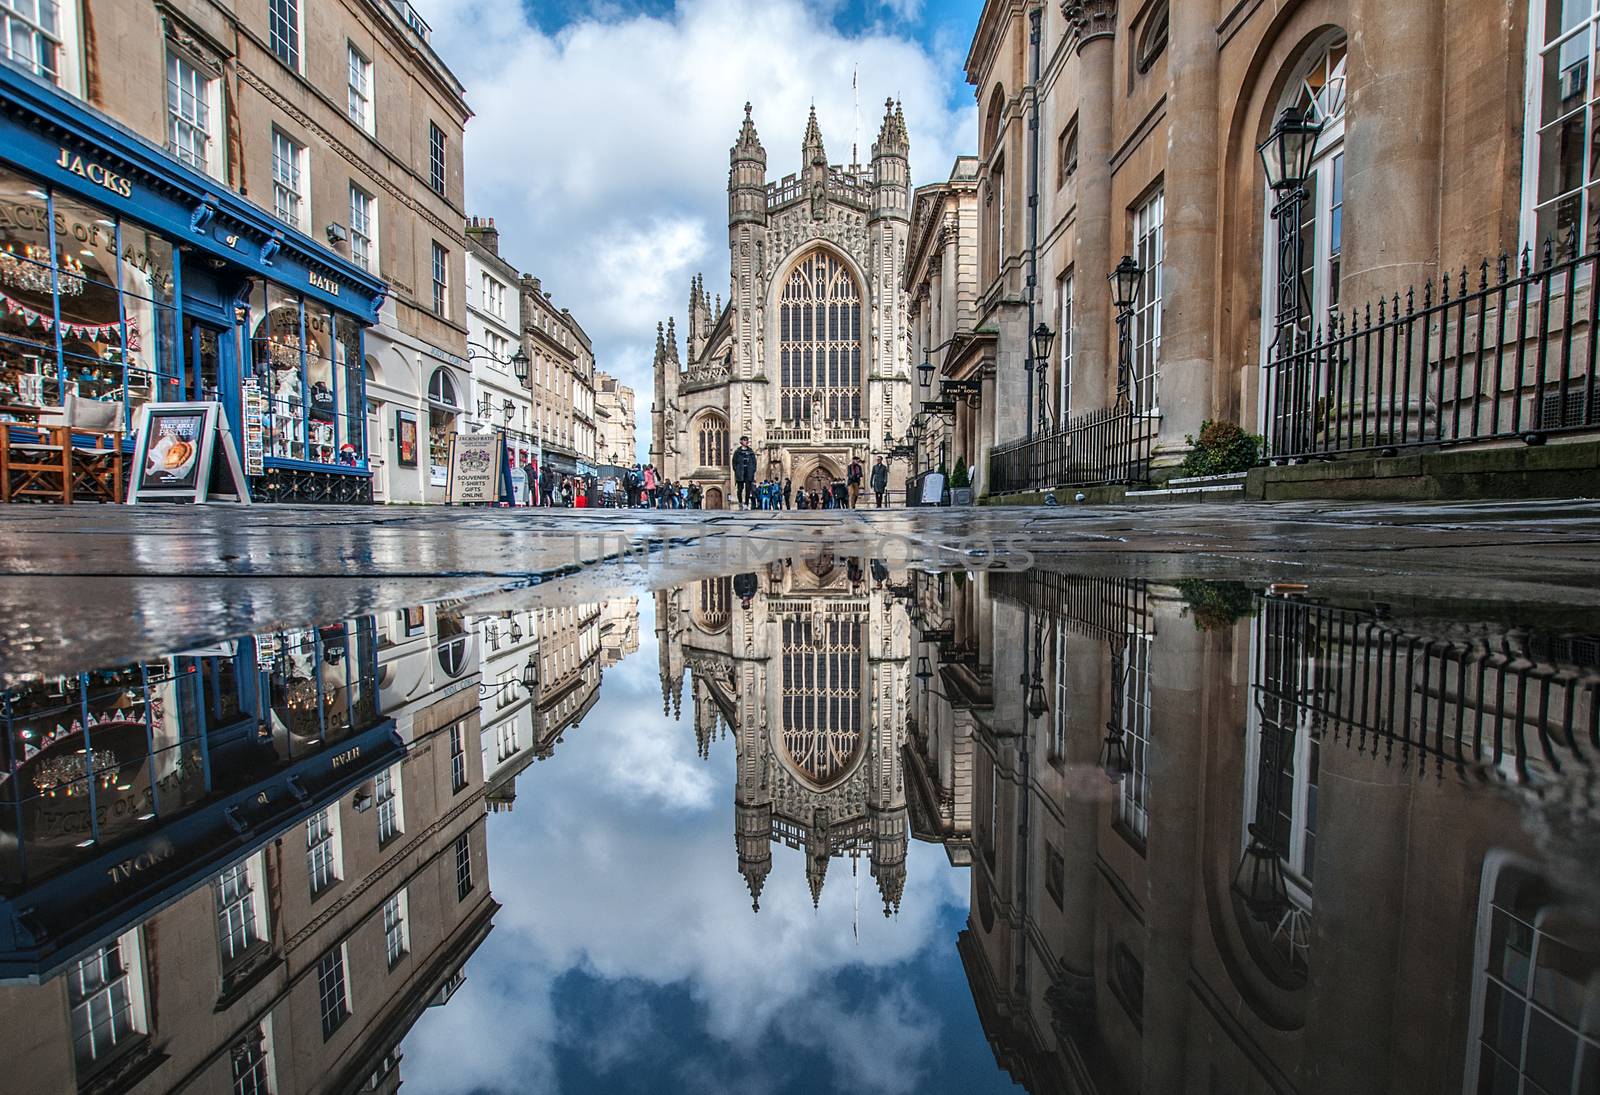 looking through the puddles at bath abbey in england